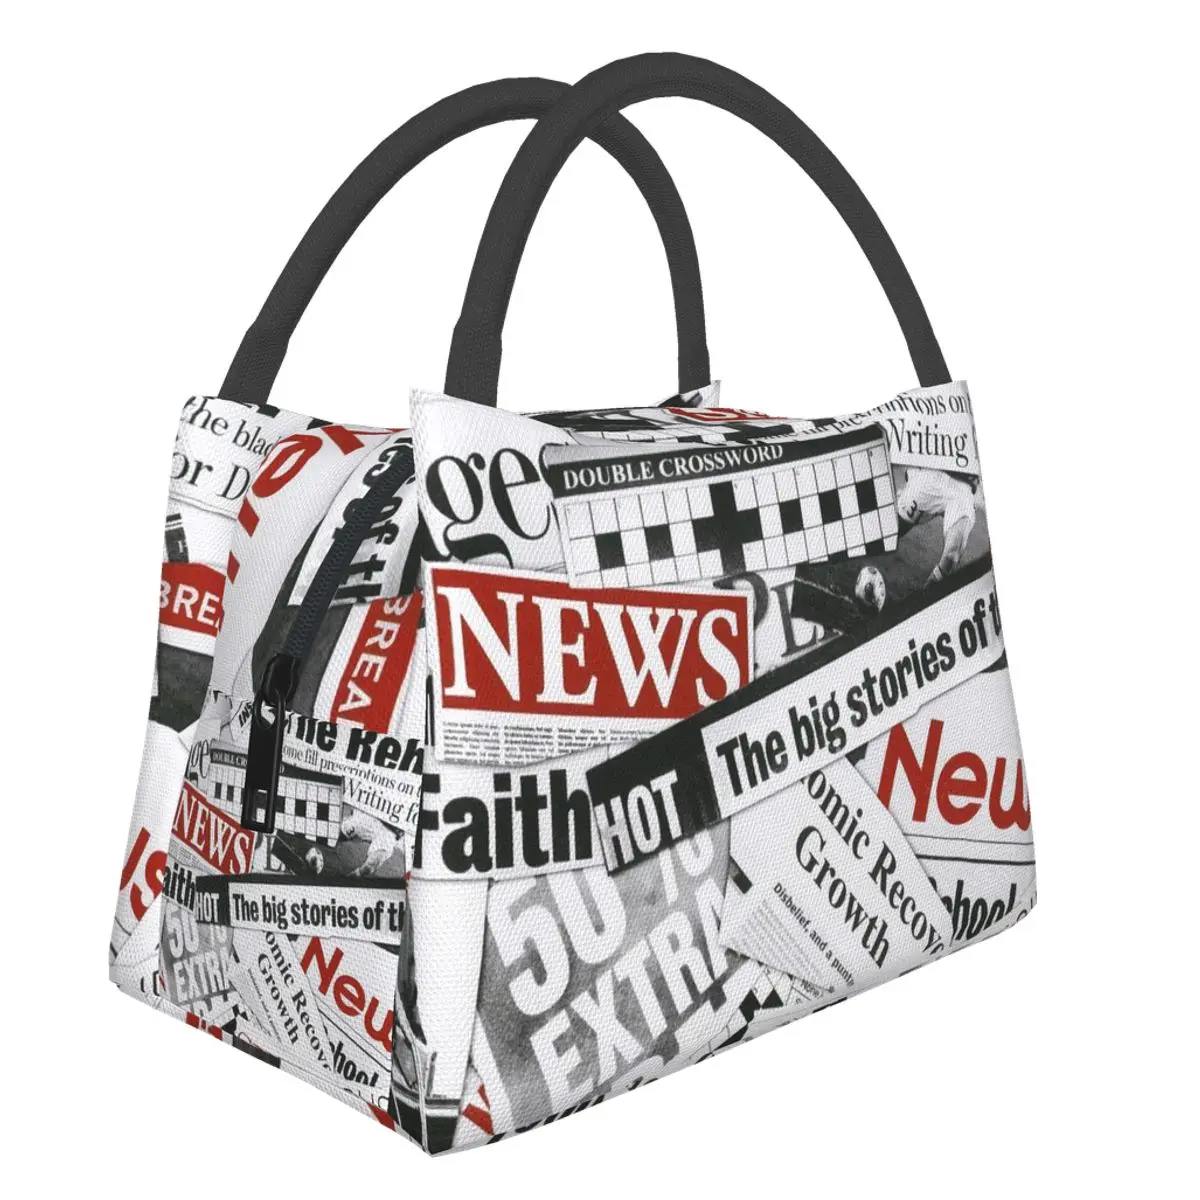 Portable Lunch Bag Newspaper Pattern Print Thermal Insulated Lunch Box Tote Cooler Handbag Bento Dinner Container School Storage portable lunch bag thermal insulated lunch box tote cooler bag bento pouch lunch container food storage bags handbag